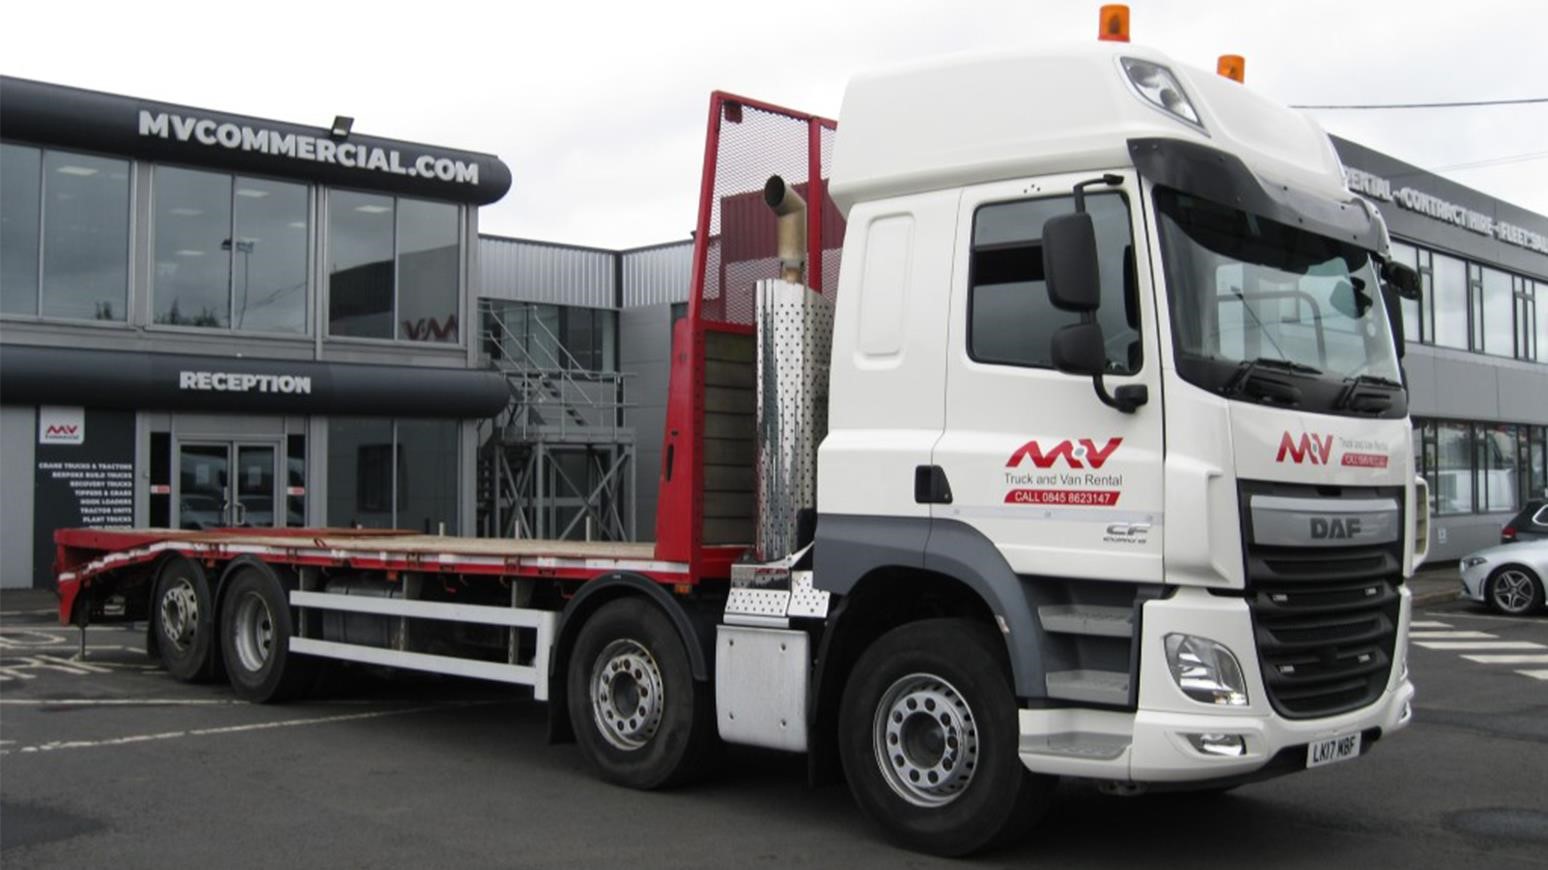 Commercial Vehicle Auctions Holds First Online Truck Auction With MV Commercial